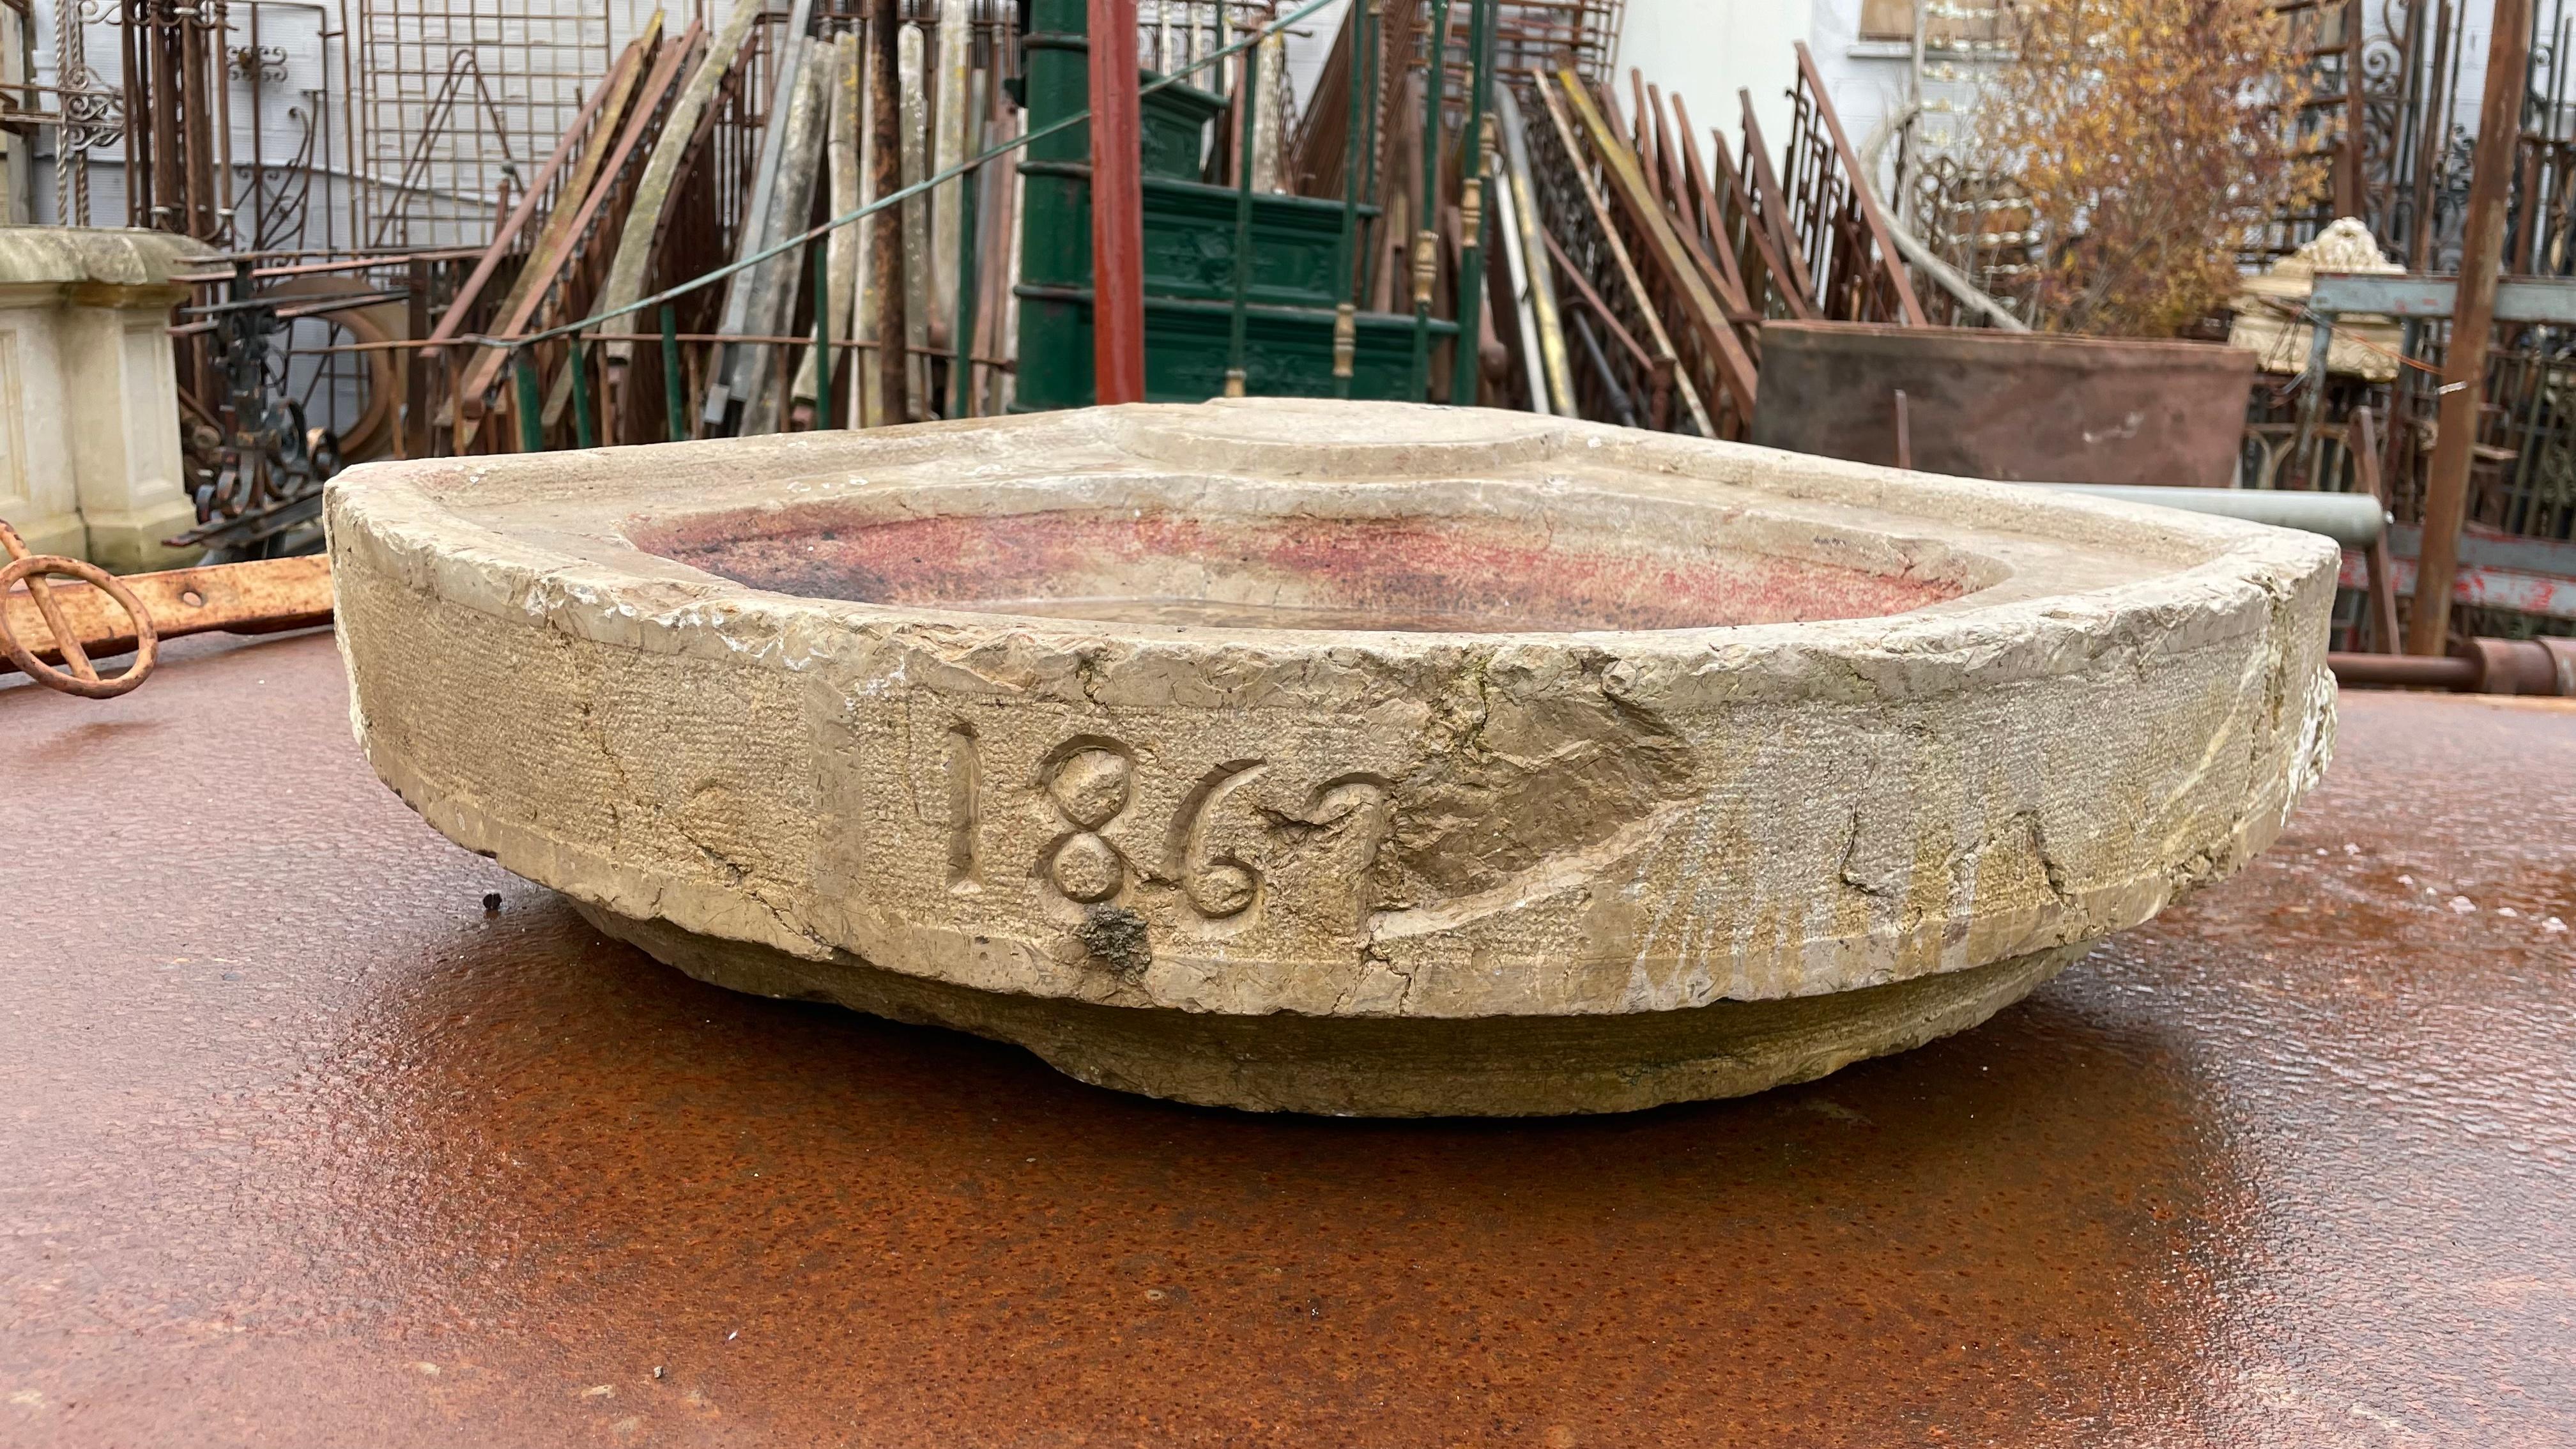 19th Century Limestone Sink in an almost triangular shape. Date carved at the front.